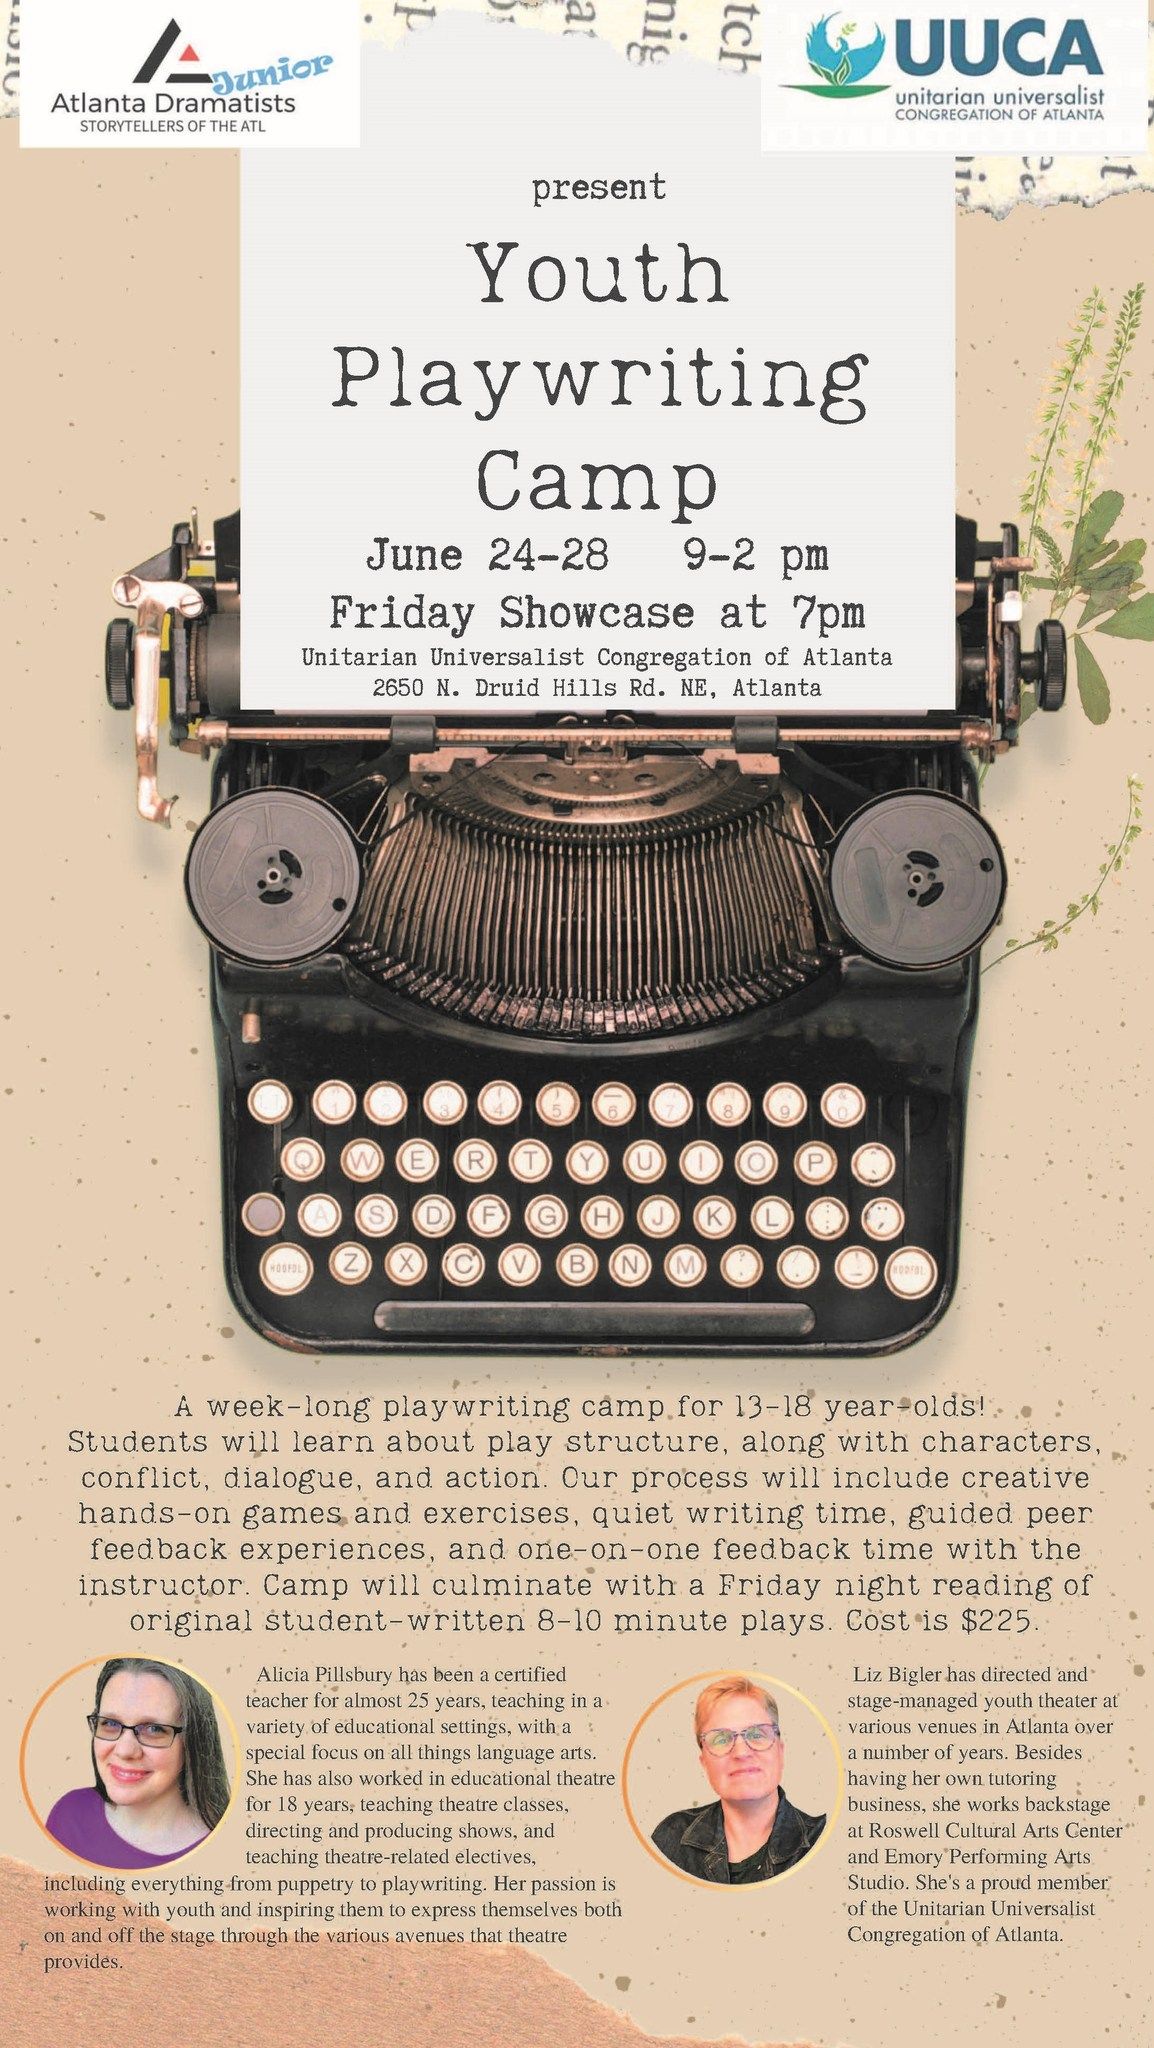 Youth Playwriting Camp